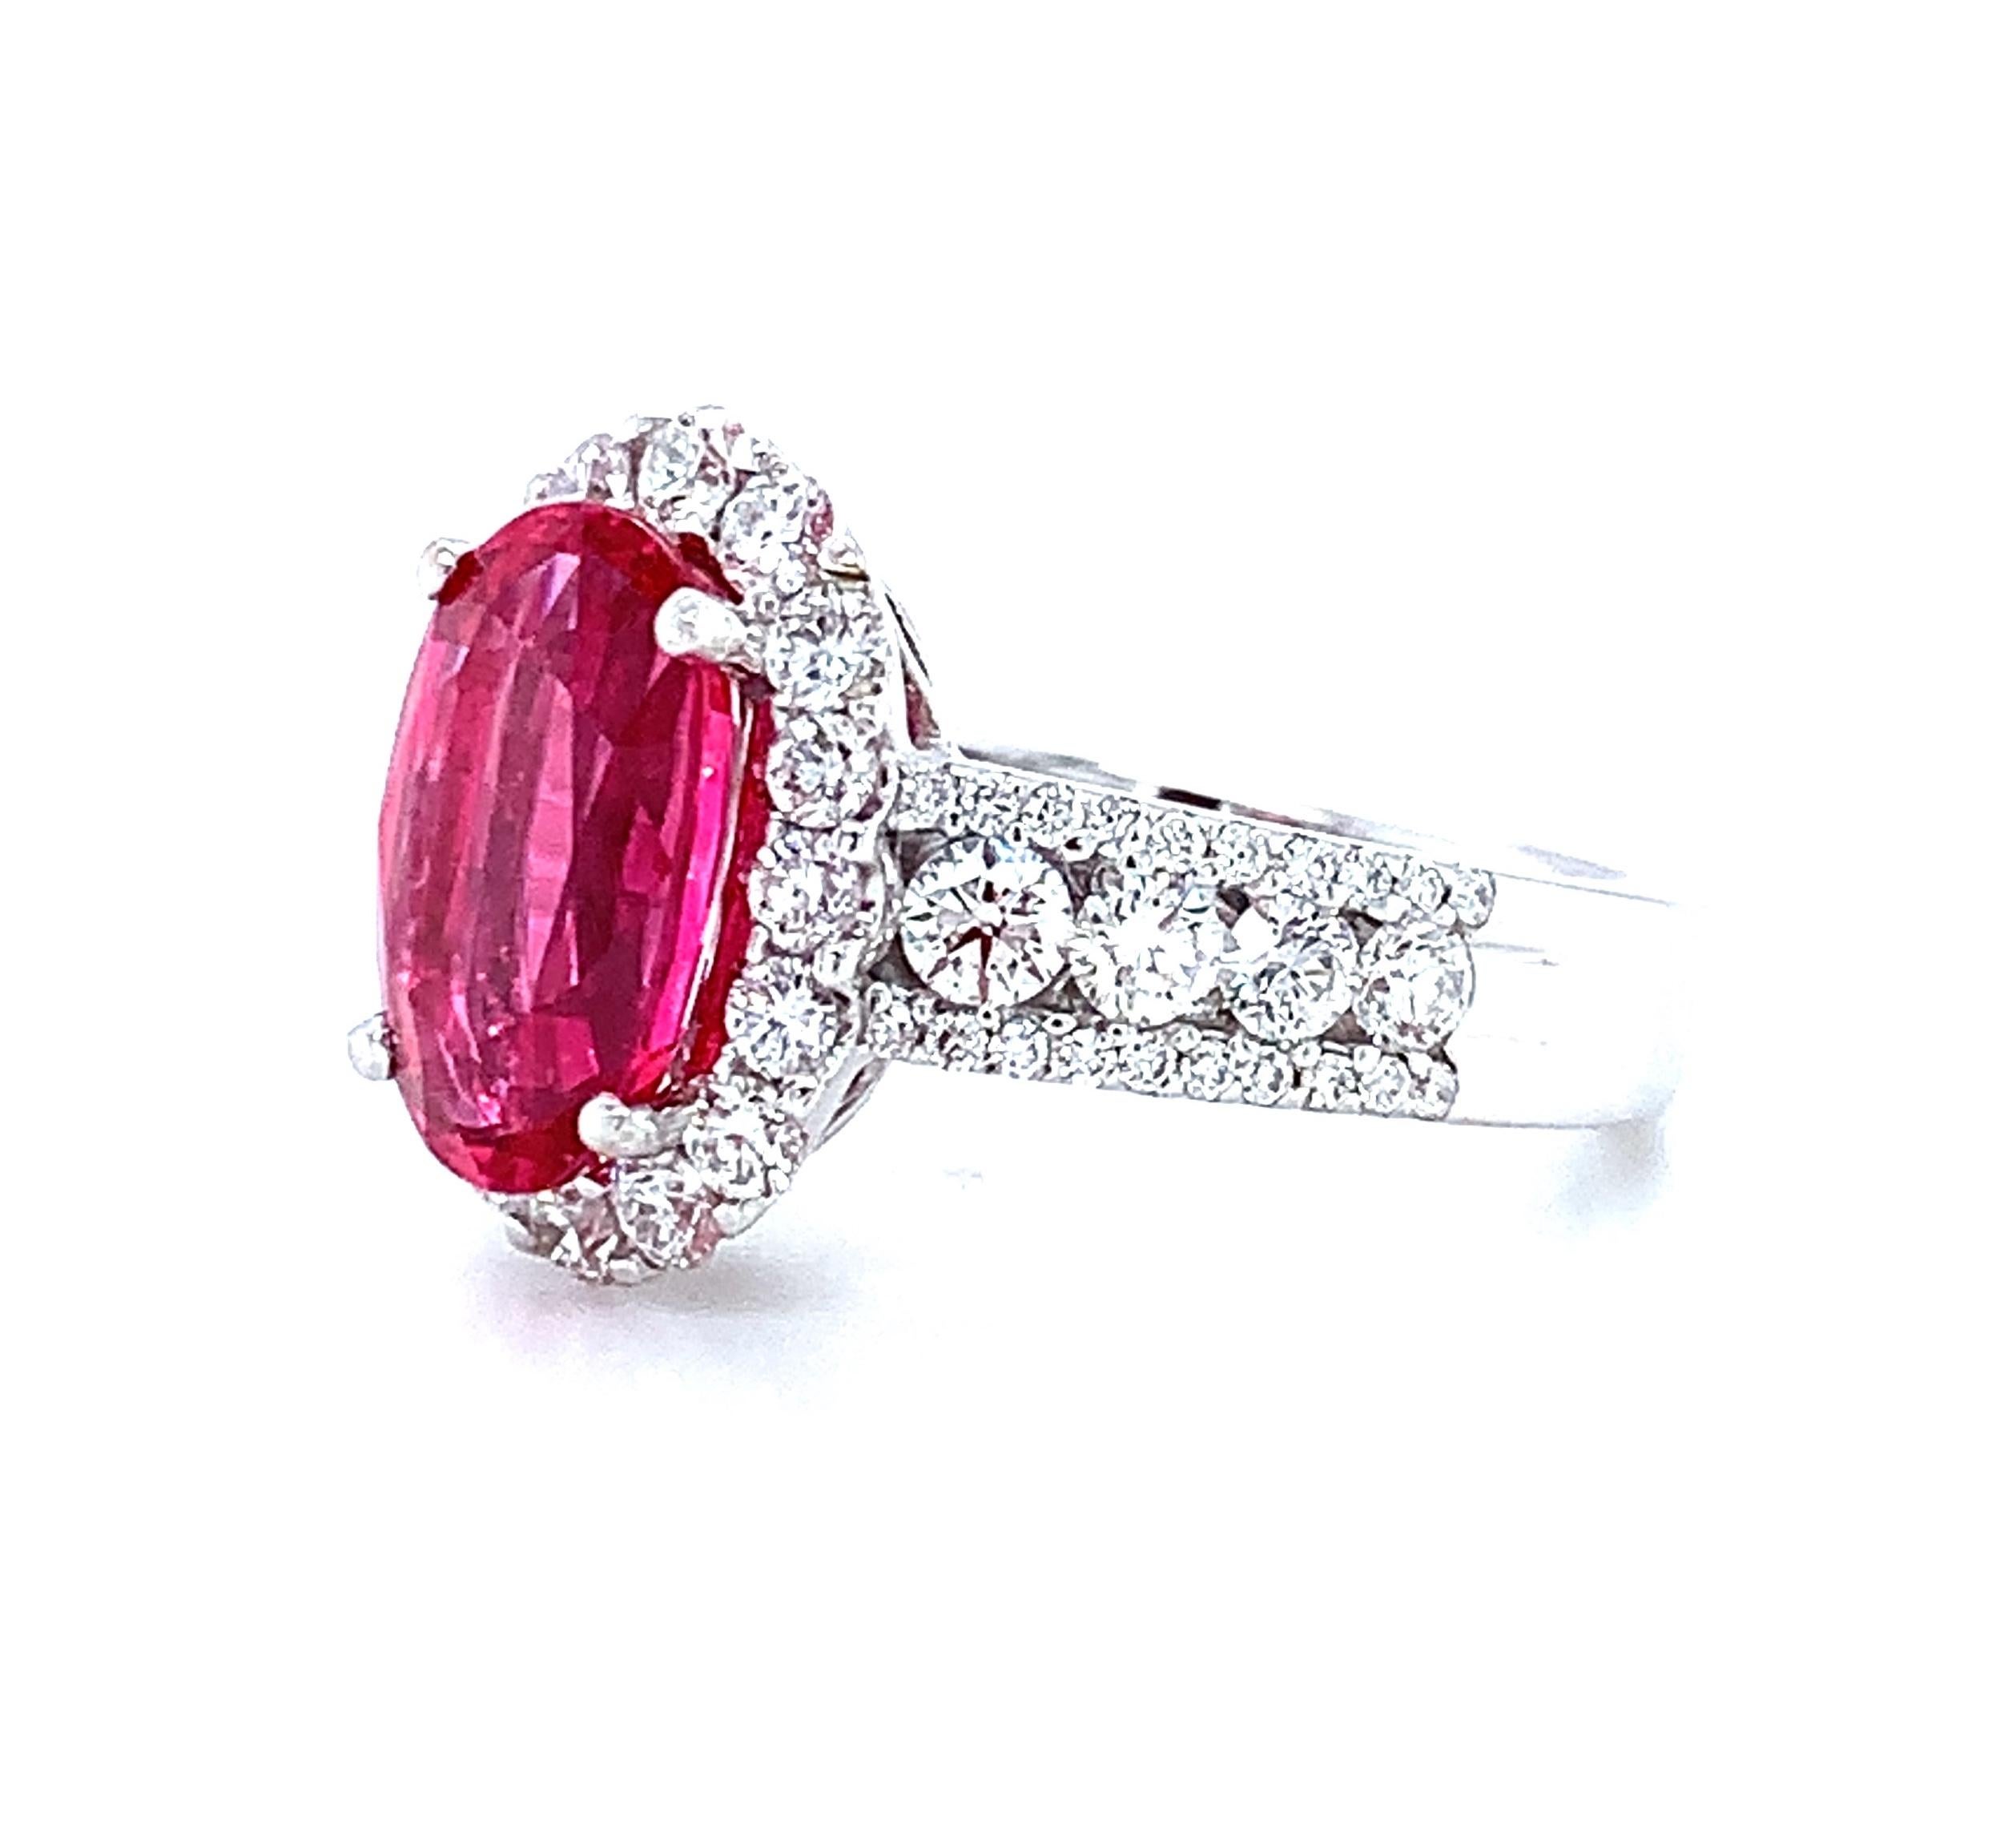 Oval Cut 3.63 Carat Red Spinel and Diamond Halo Cocktail Ring in 18k White Gold  For Sale